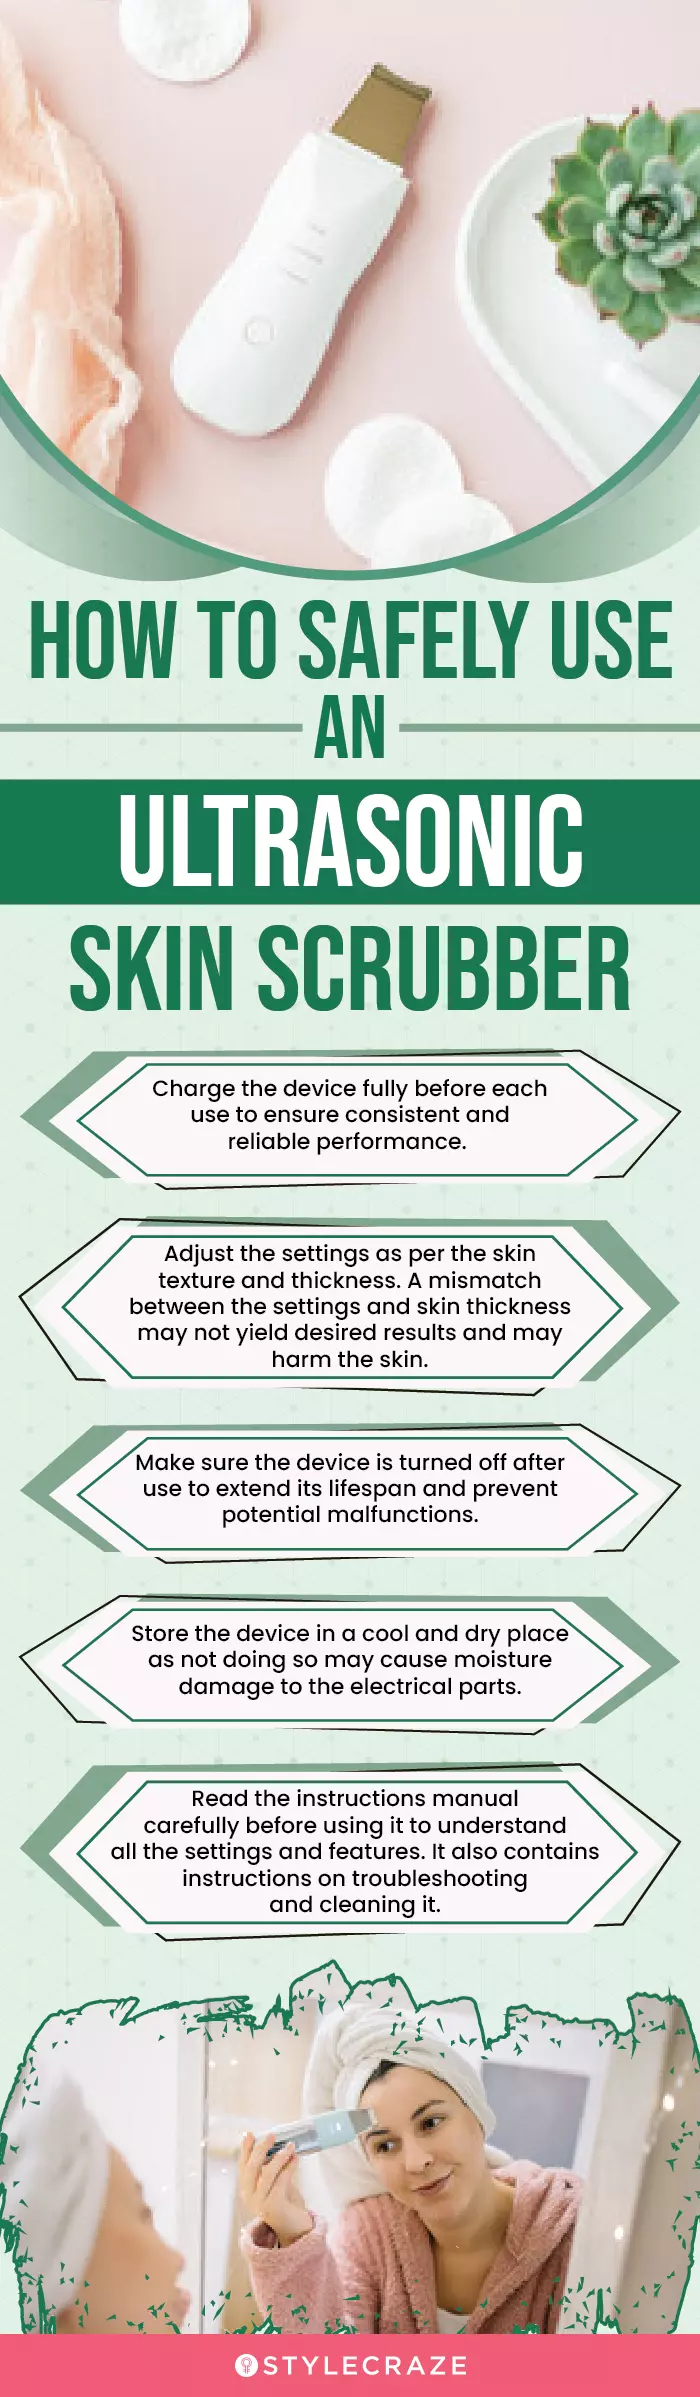 How To Safely Use An Ultrasonic Skin Scrubber (infographic)